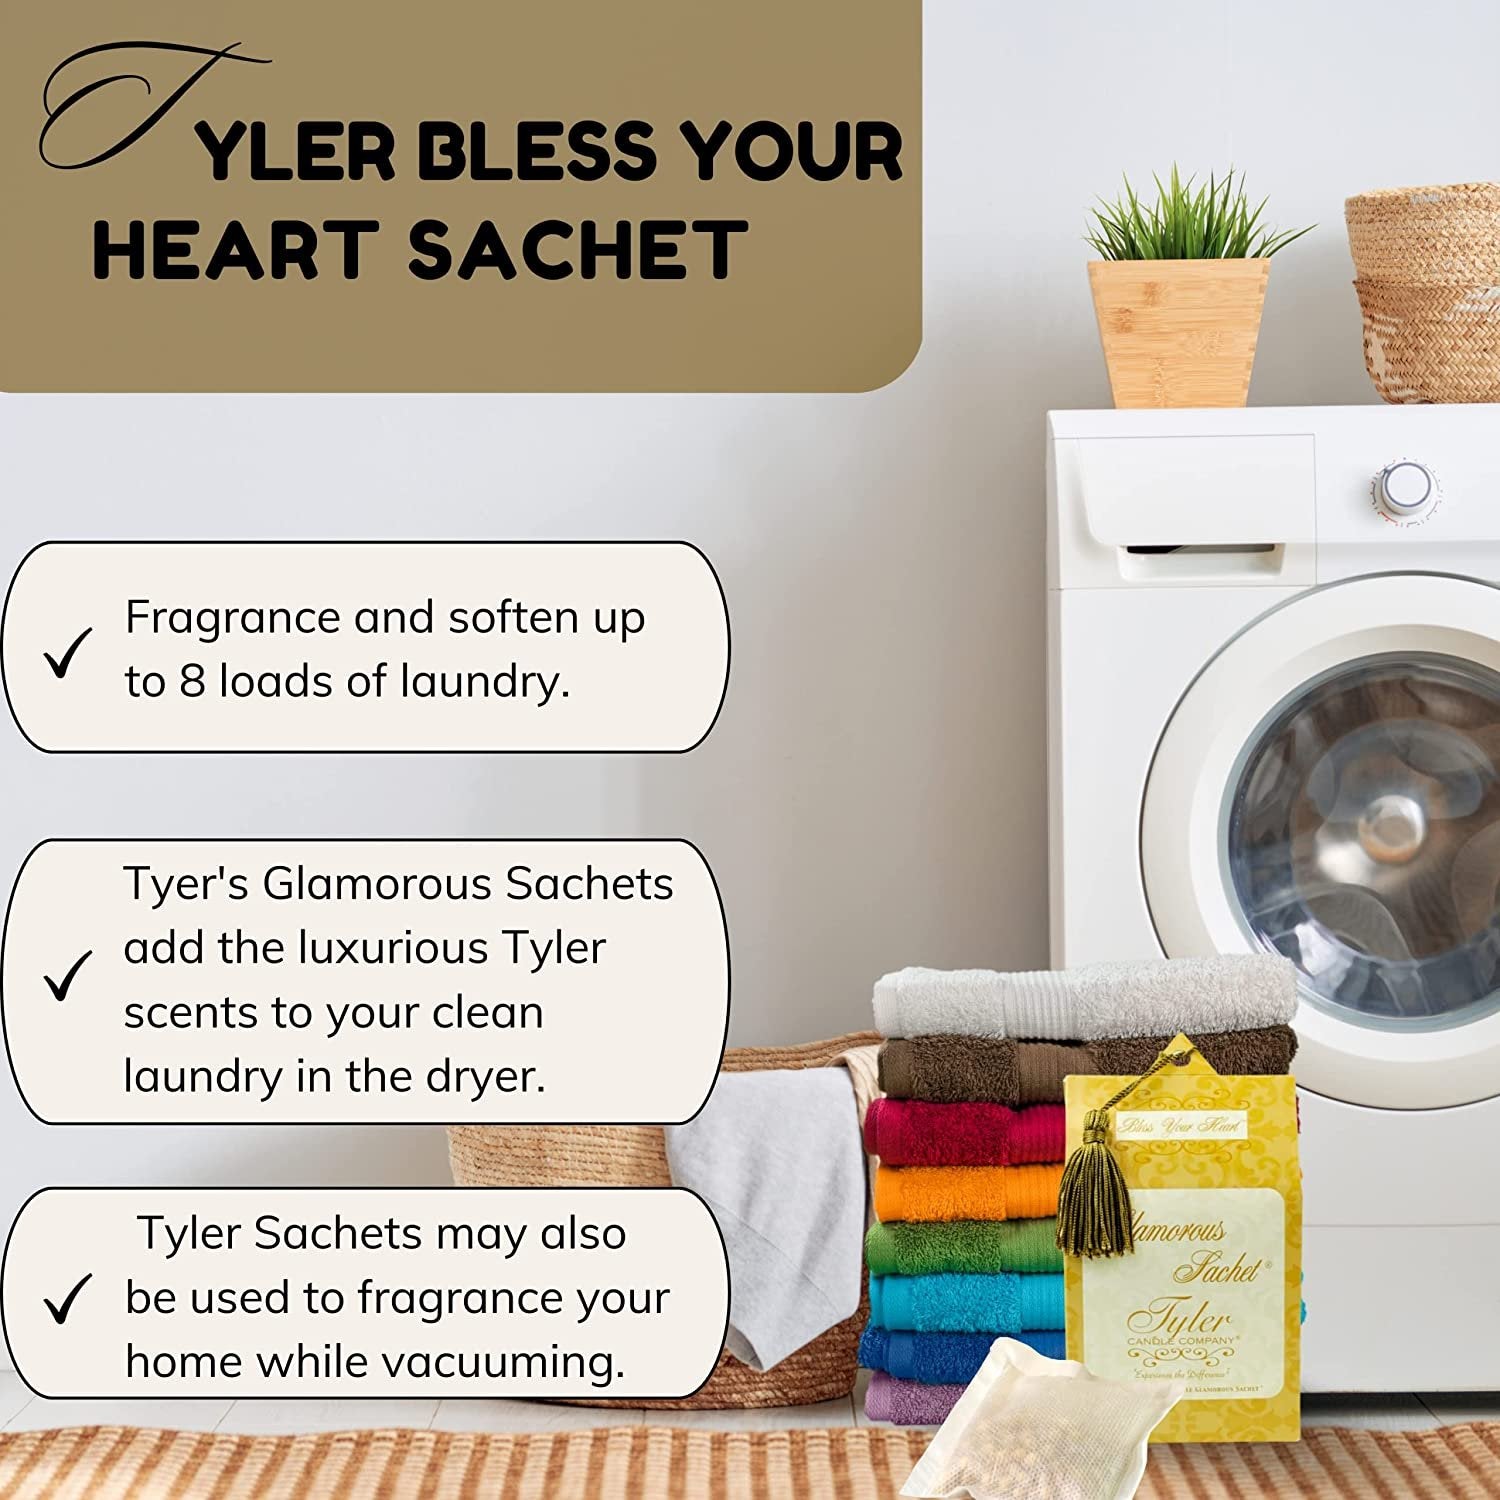 Tyler Candle Company Bless Your Heart Dryer Sheet Sachets - Glamorous Reusable Dryer Sheets - Sachets for Drawers and Closets - 1 Pack, 4 Sachets, Dryer, Home, or Personal Sachet, with Bonus Key Chain